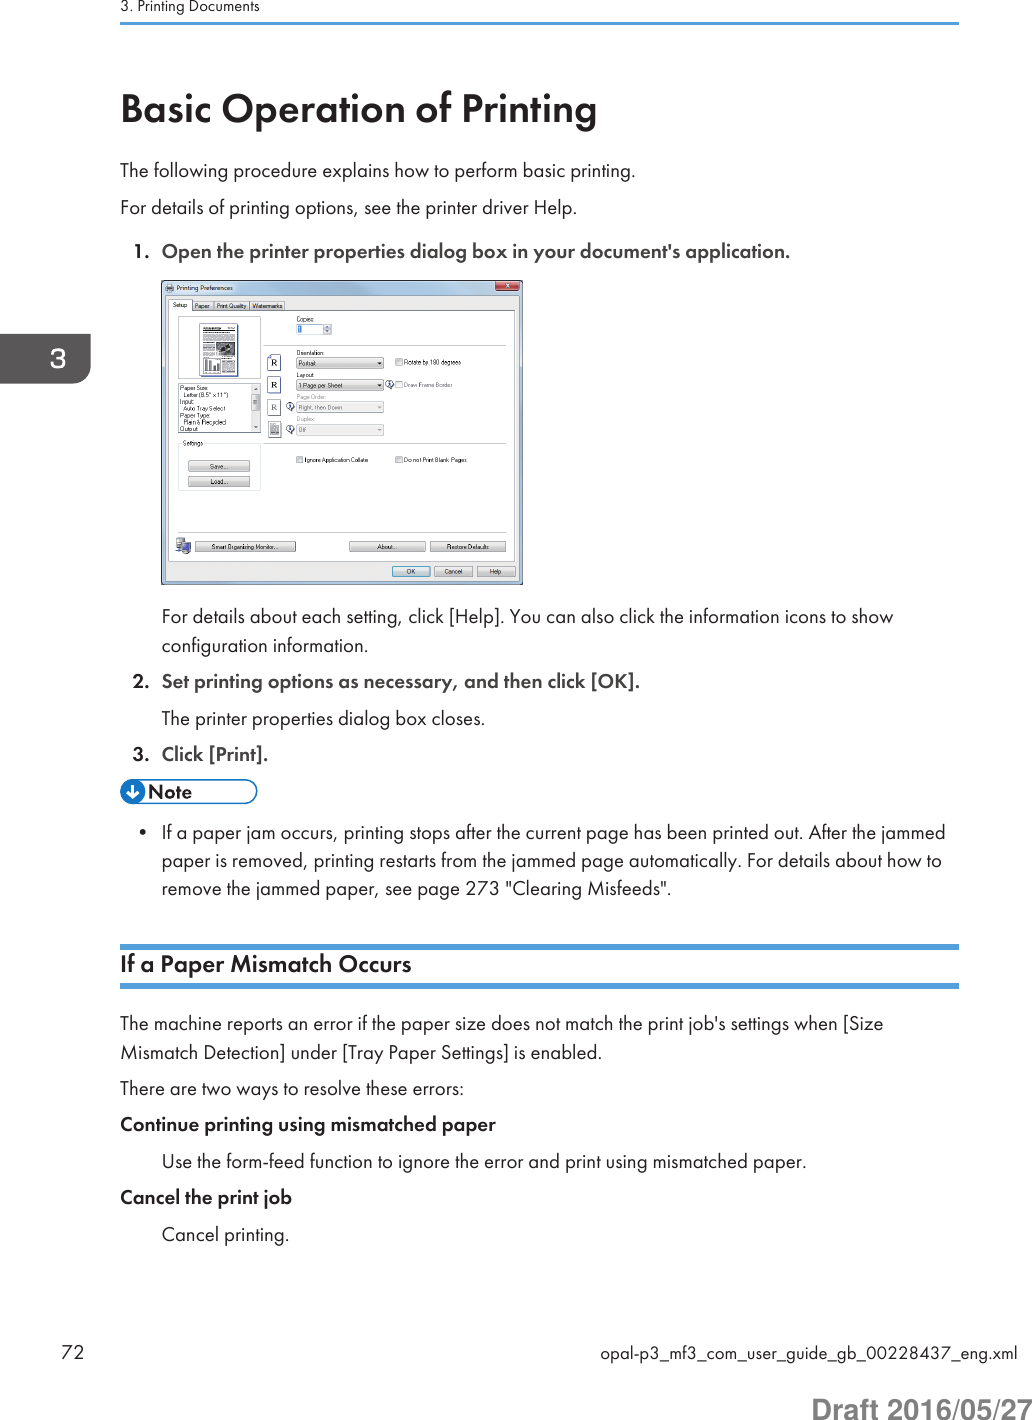 Basic Operation of PrintingThe following procedure explains how to perform basic printing.For details of printing options, see the printer driver Help.1. Open the printer properties dialog box in your document&apos;s application.For details about each setting, click [Help]. You can also click the information icons to showconfiguration information.2. Set printing options as necessary, and then click [OK].The printer properties dialog box closes.3. Click [Print].• If a paper jam occurs, printing stops after the current page has been printed out. After the jammedpaper is removed, printing restarts from the jammed page automatically. For details about how toremove the jammed paper, see page 273 &quot;Clearing Misfeeds&quot;.If a Paper Mismatch OccursThe machine reports an error if the paper size does not match the print job&apos;s settings when [SizeMismatch Detection] under [Tray Paper Settings] is enabled.There are two ways to resolve these errors:Continue printing using mismatched paperUse the form-feed function to ignore the error and print using mismatched paper.Cancel the print jobCancel printing.3. Printing Documents72 opal-p3_mf3_com_user_guide_gb_00228437_eng.xmlDraft 2016/05/27